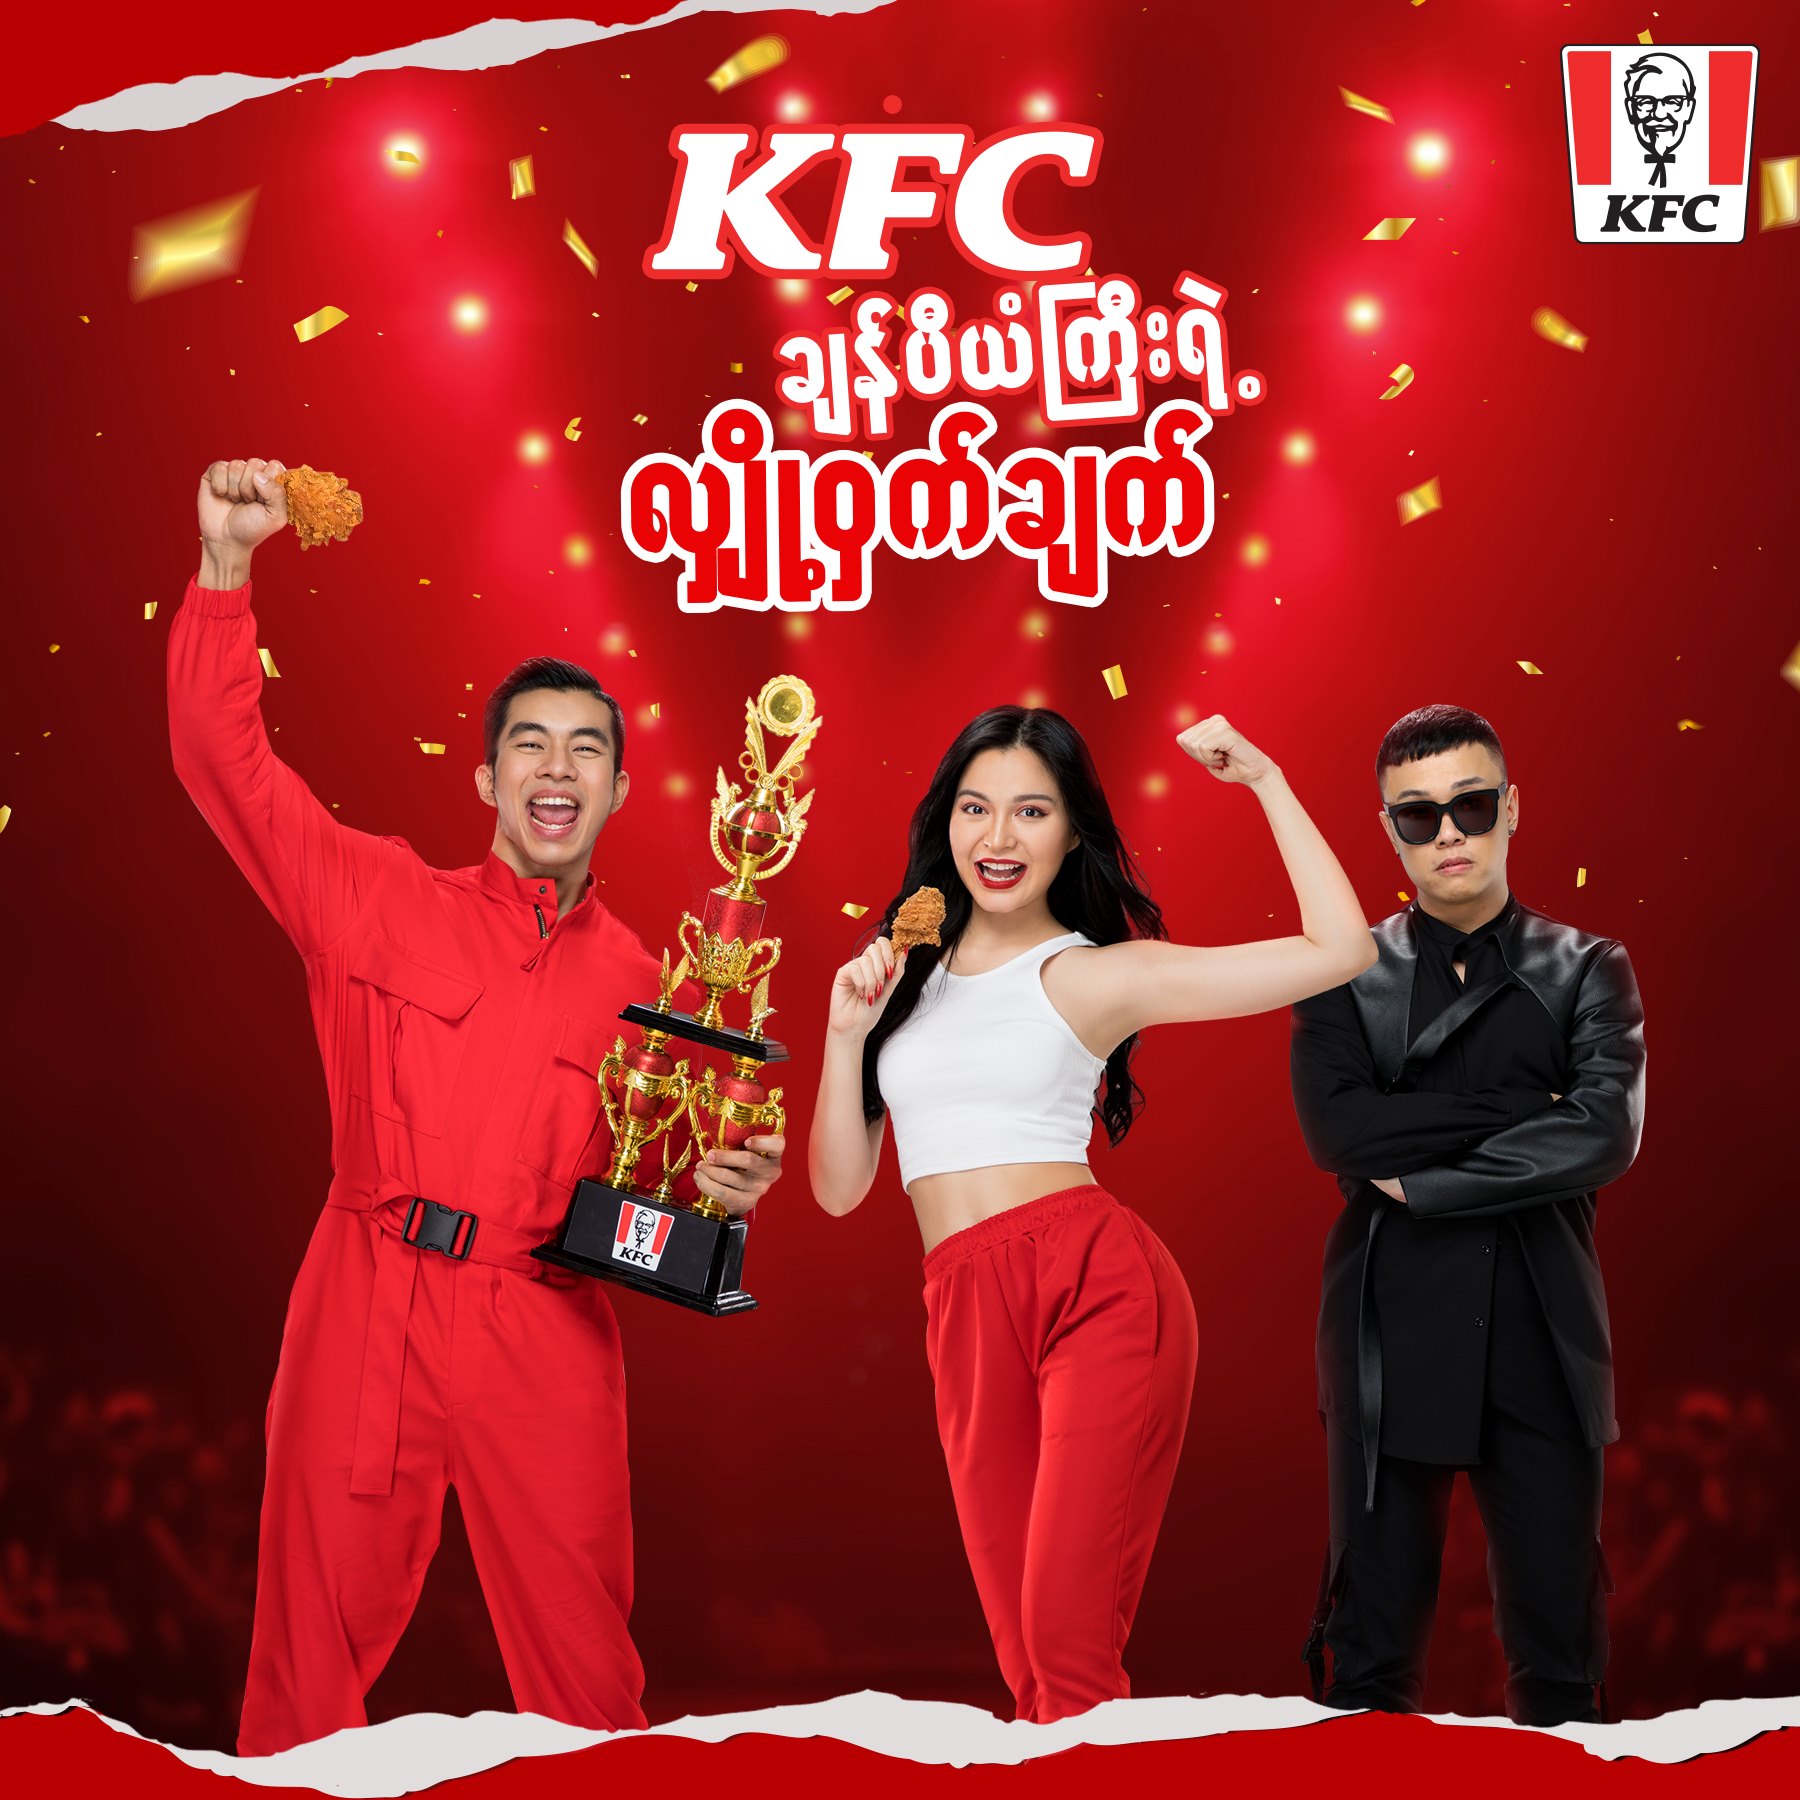 And the winner is... big and spicy KFC